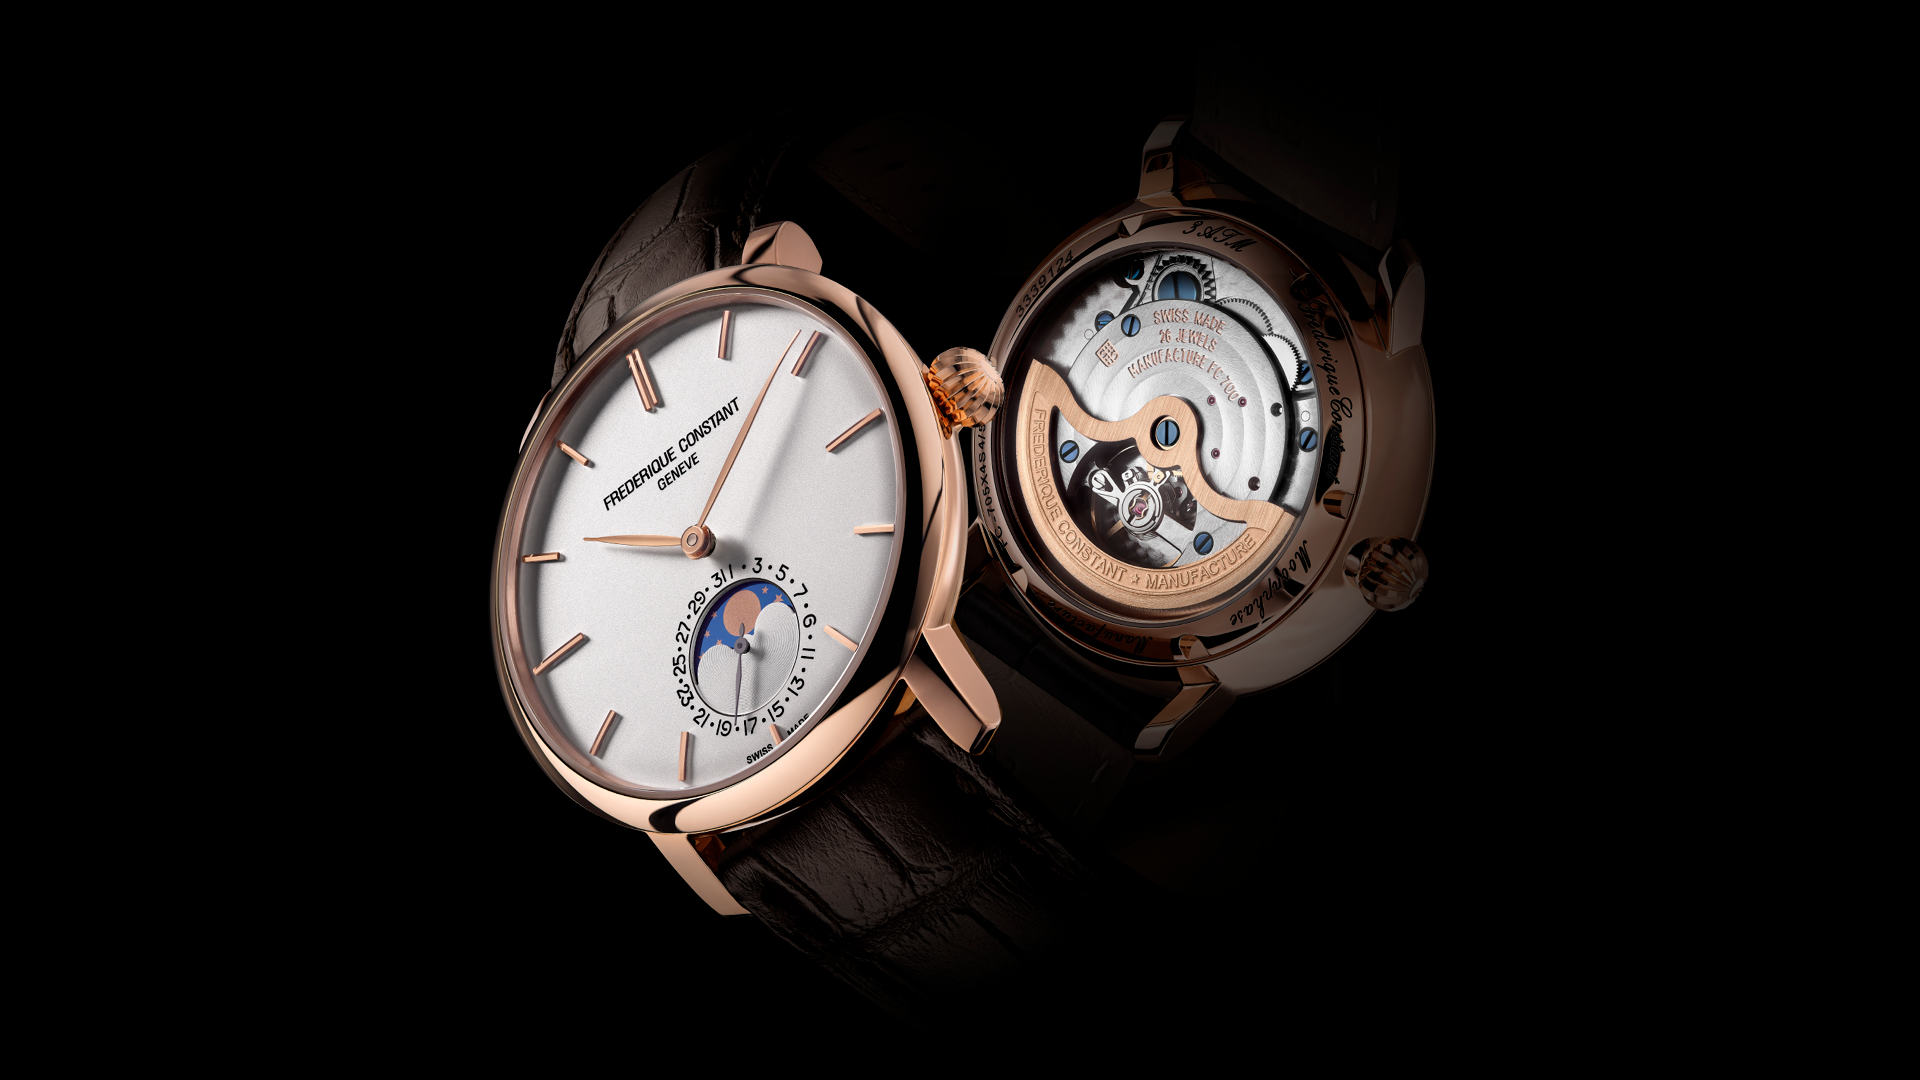 Slimline Moonphase Manufacture watch for man.   Automatic movement, white dial, rose-gold plated case, date counter, moonphase and brown leather strap